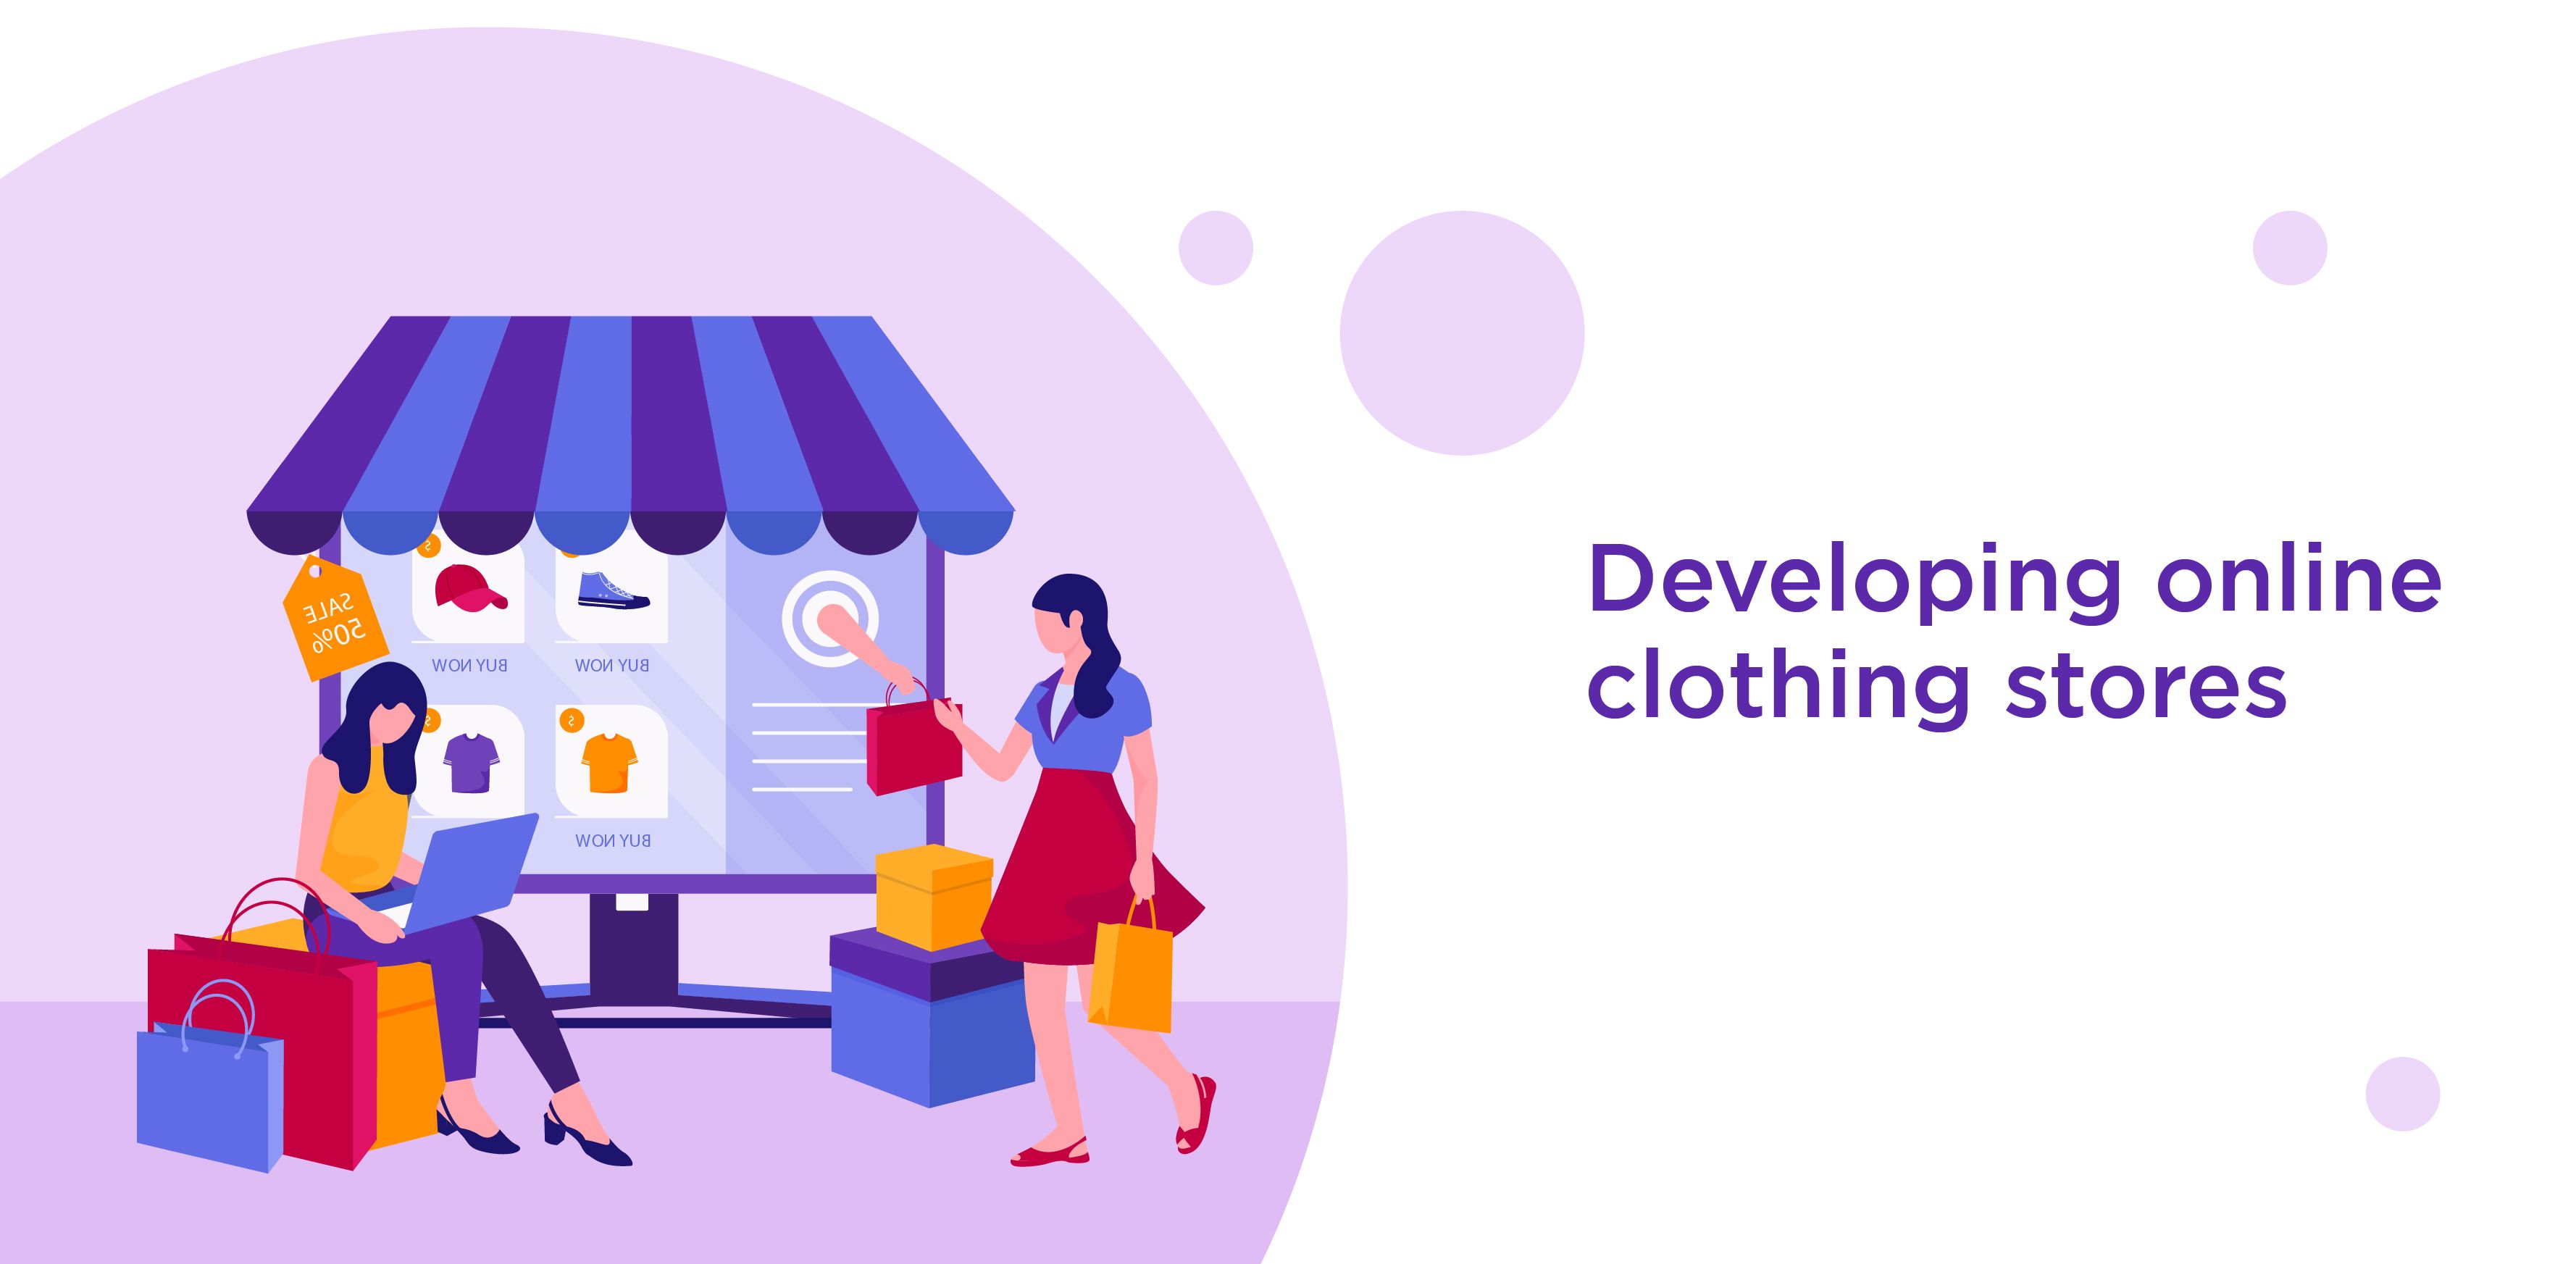 What are the benefits of developing online clothing stores?